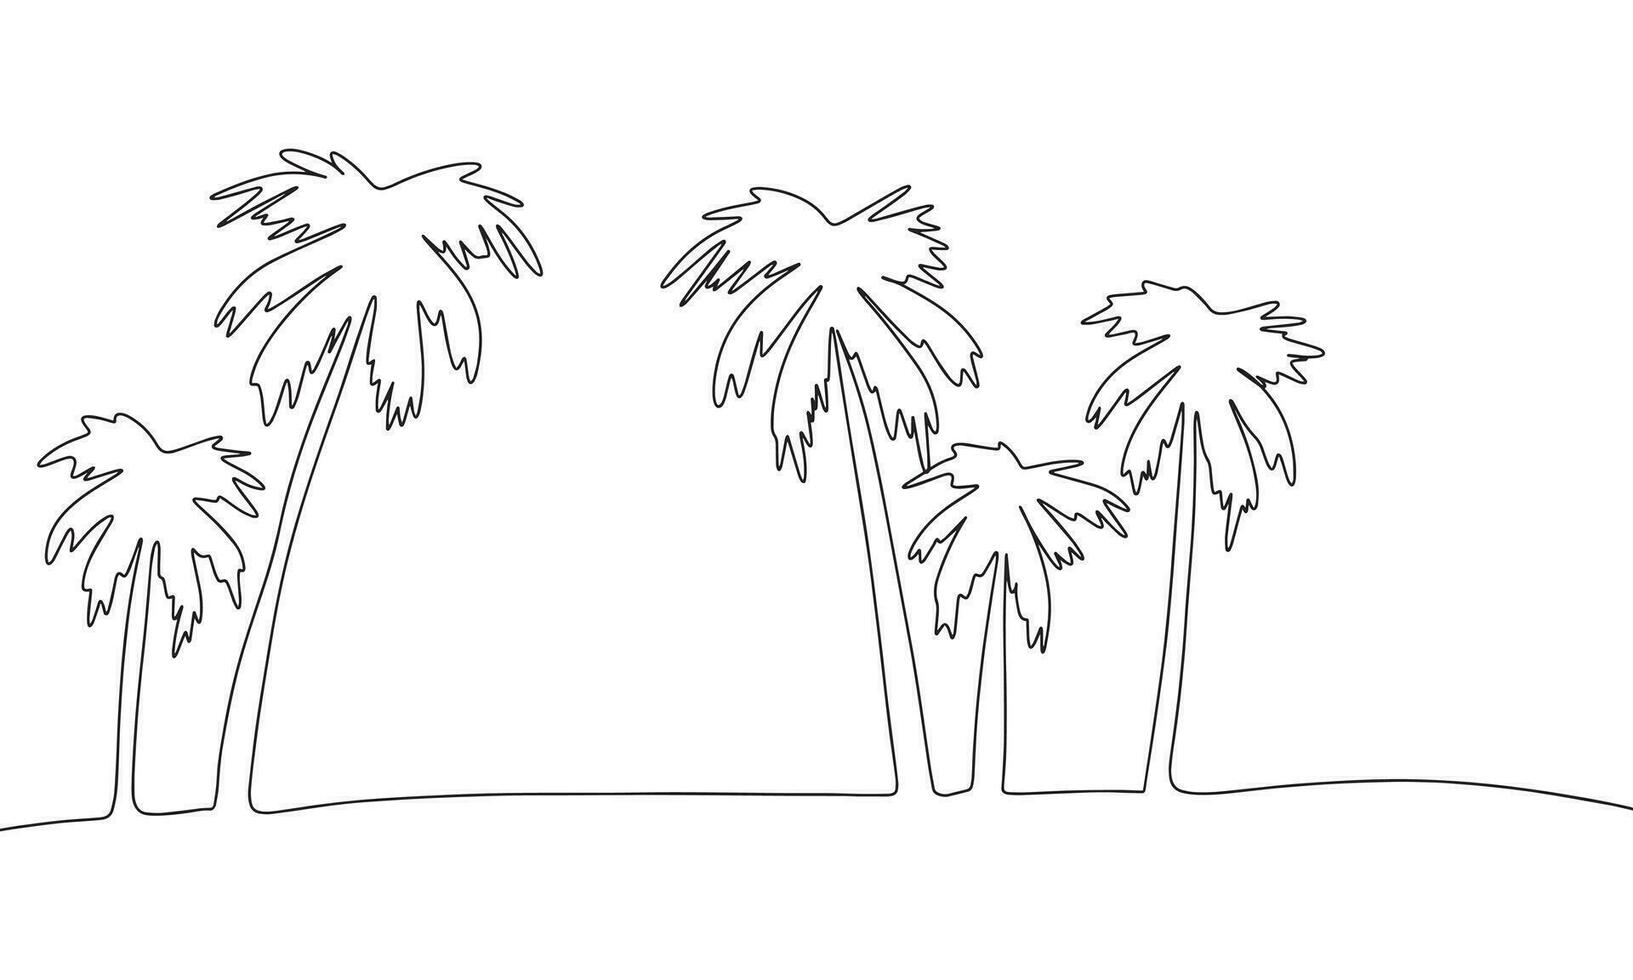 One Continuous line drawing of palm trees. Thin curls and romantic symbols in simple linear style. Minimalistic Doodle vector illustration